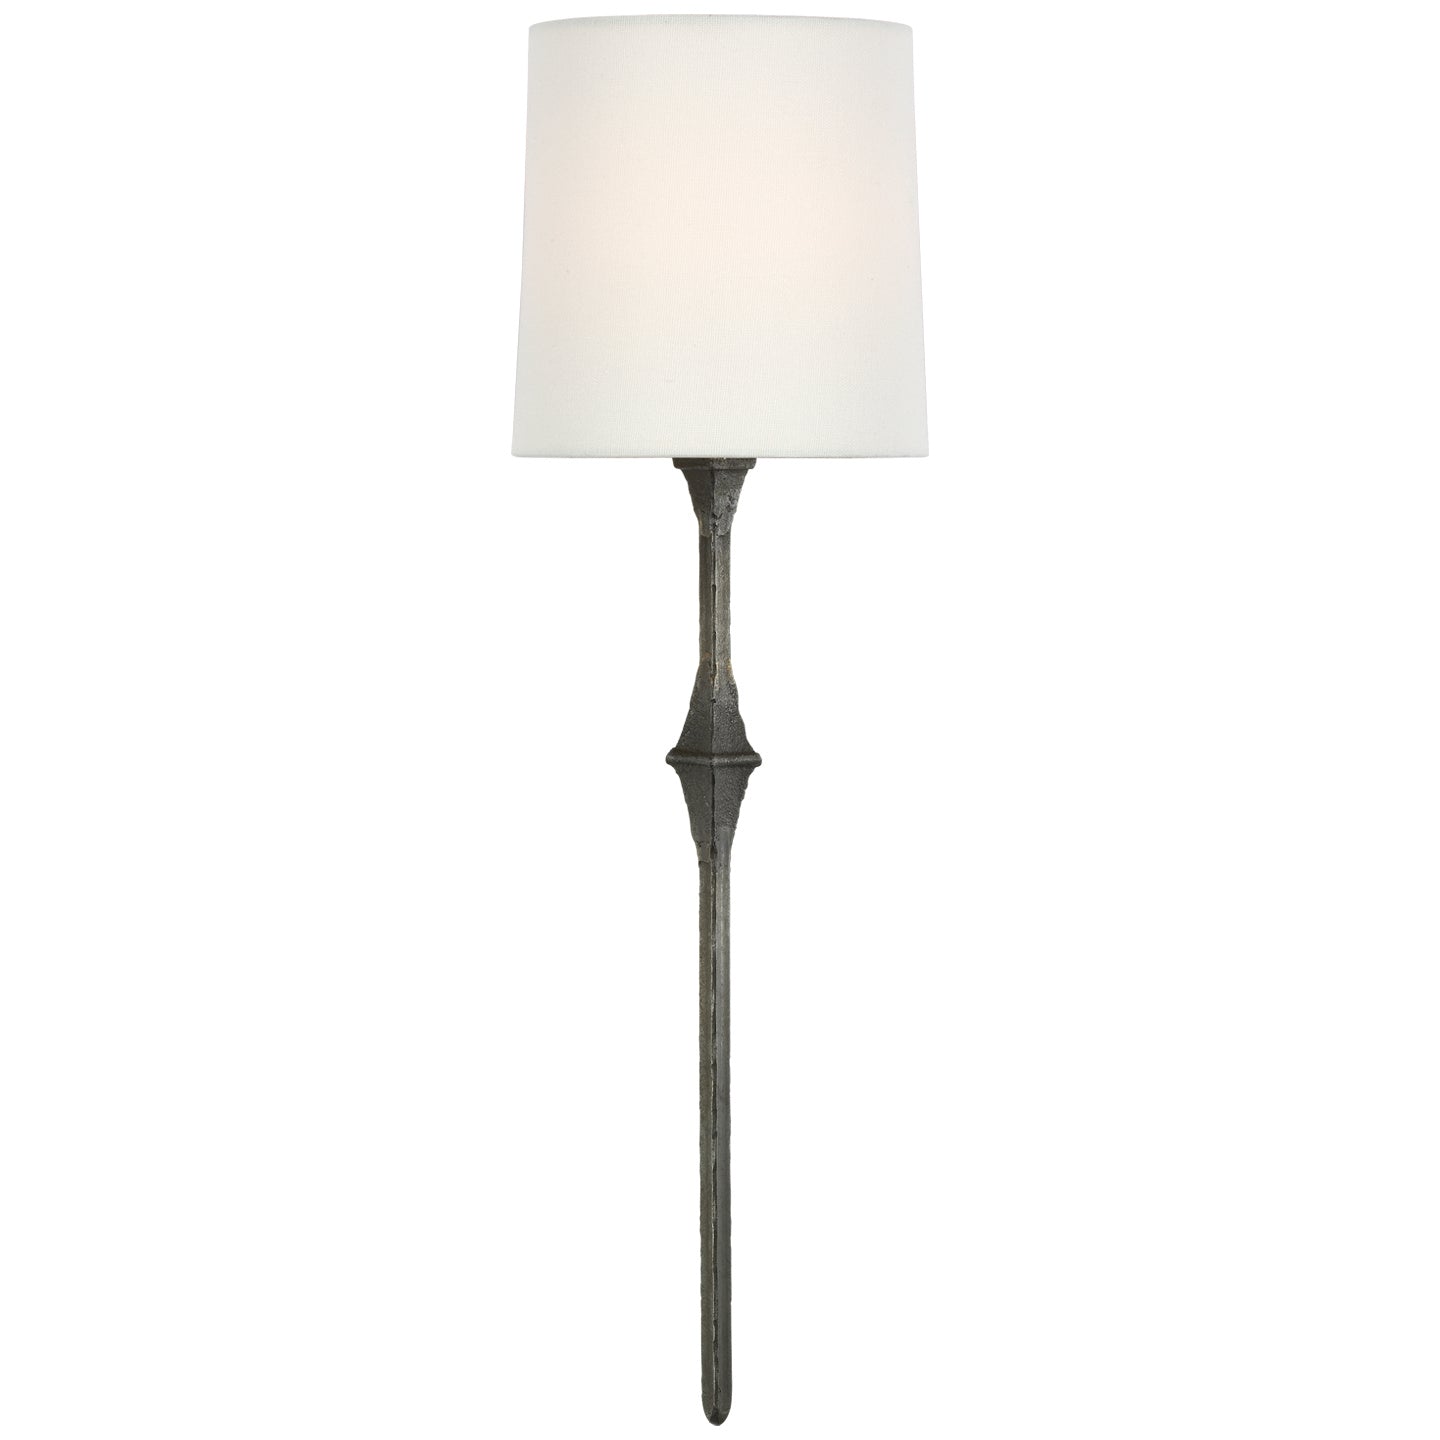 Load image into Gallery viewer, Visual Comfort Signature - S 2401AI-L - One Light Wall Sconce - dauphine - Aged Iron
